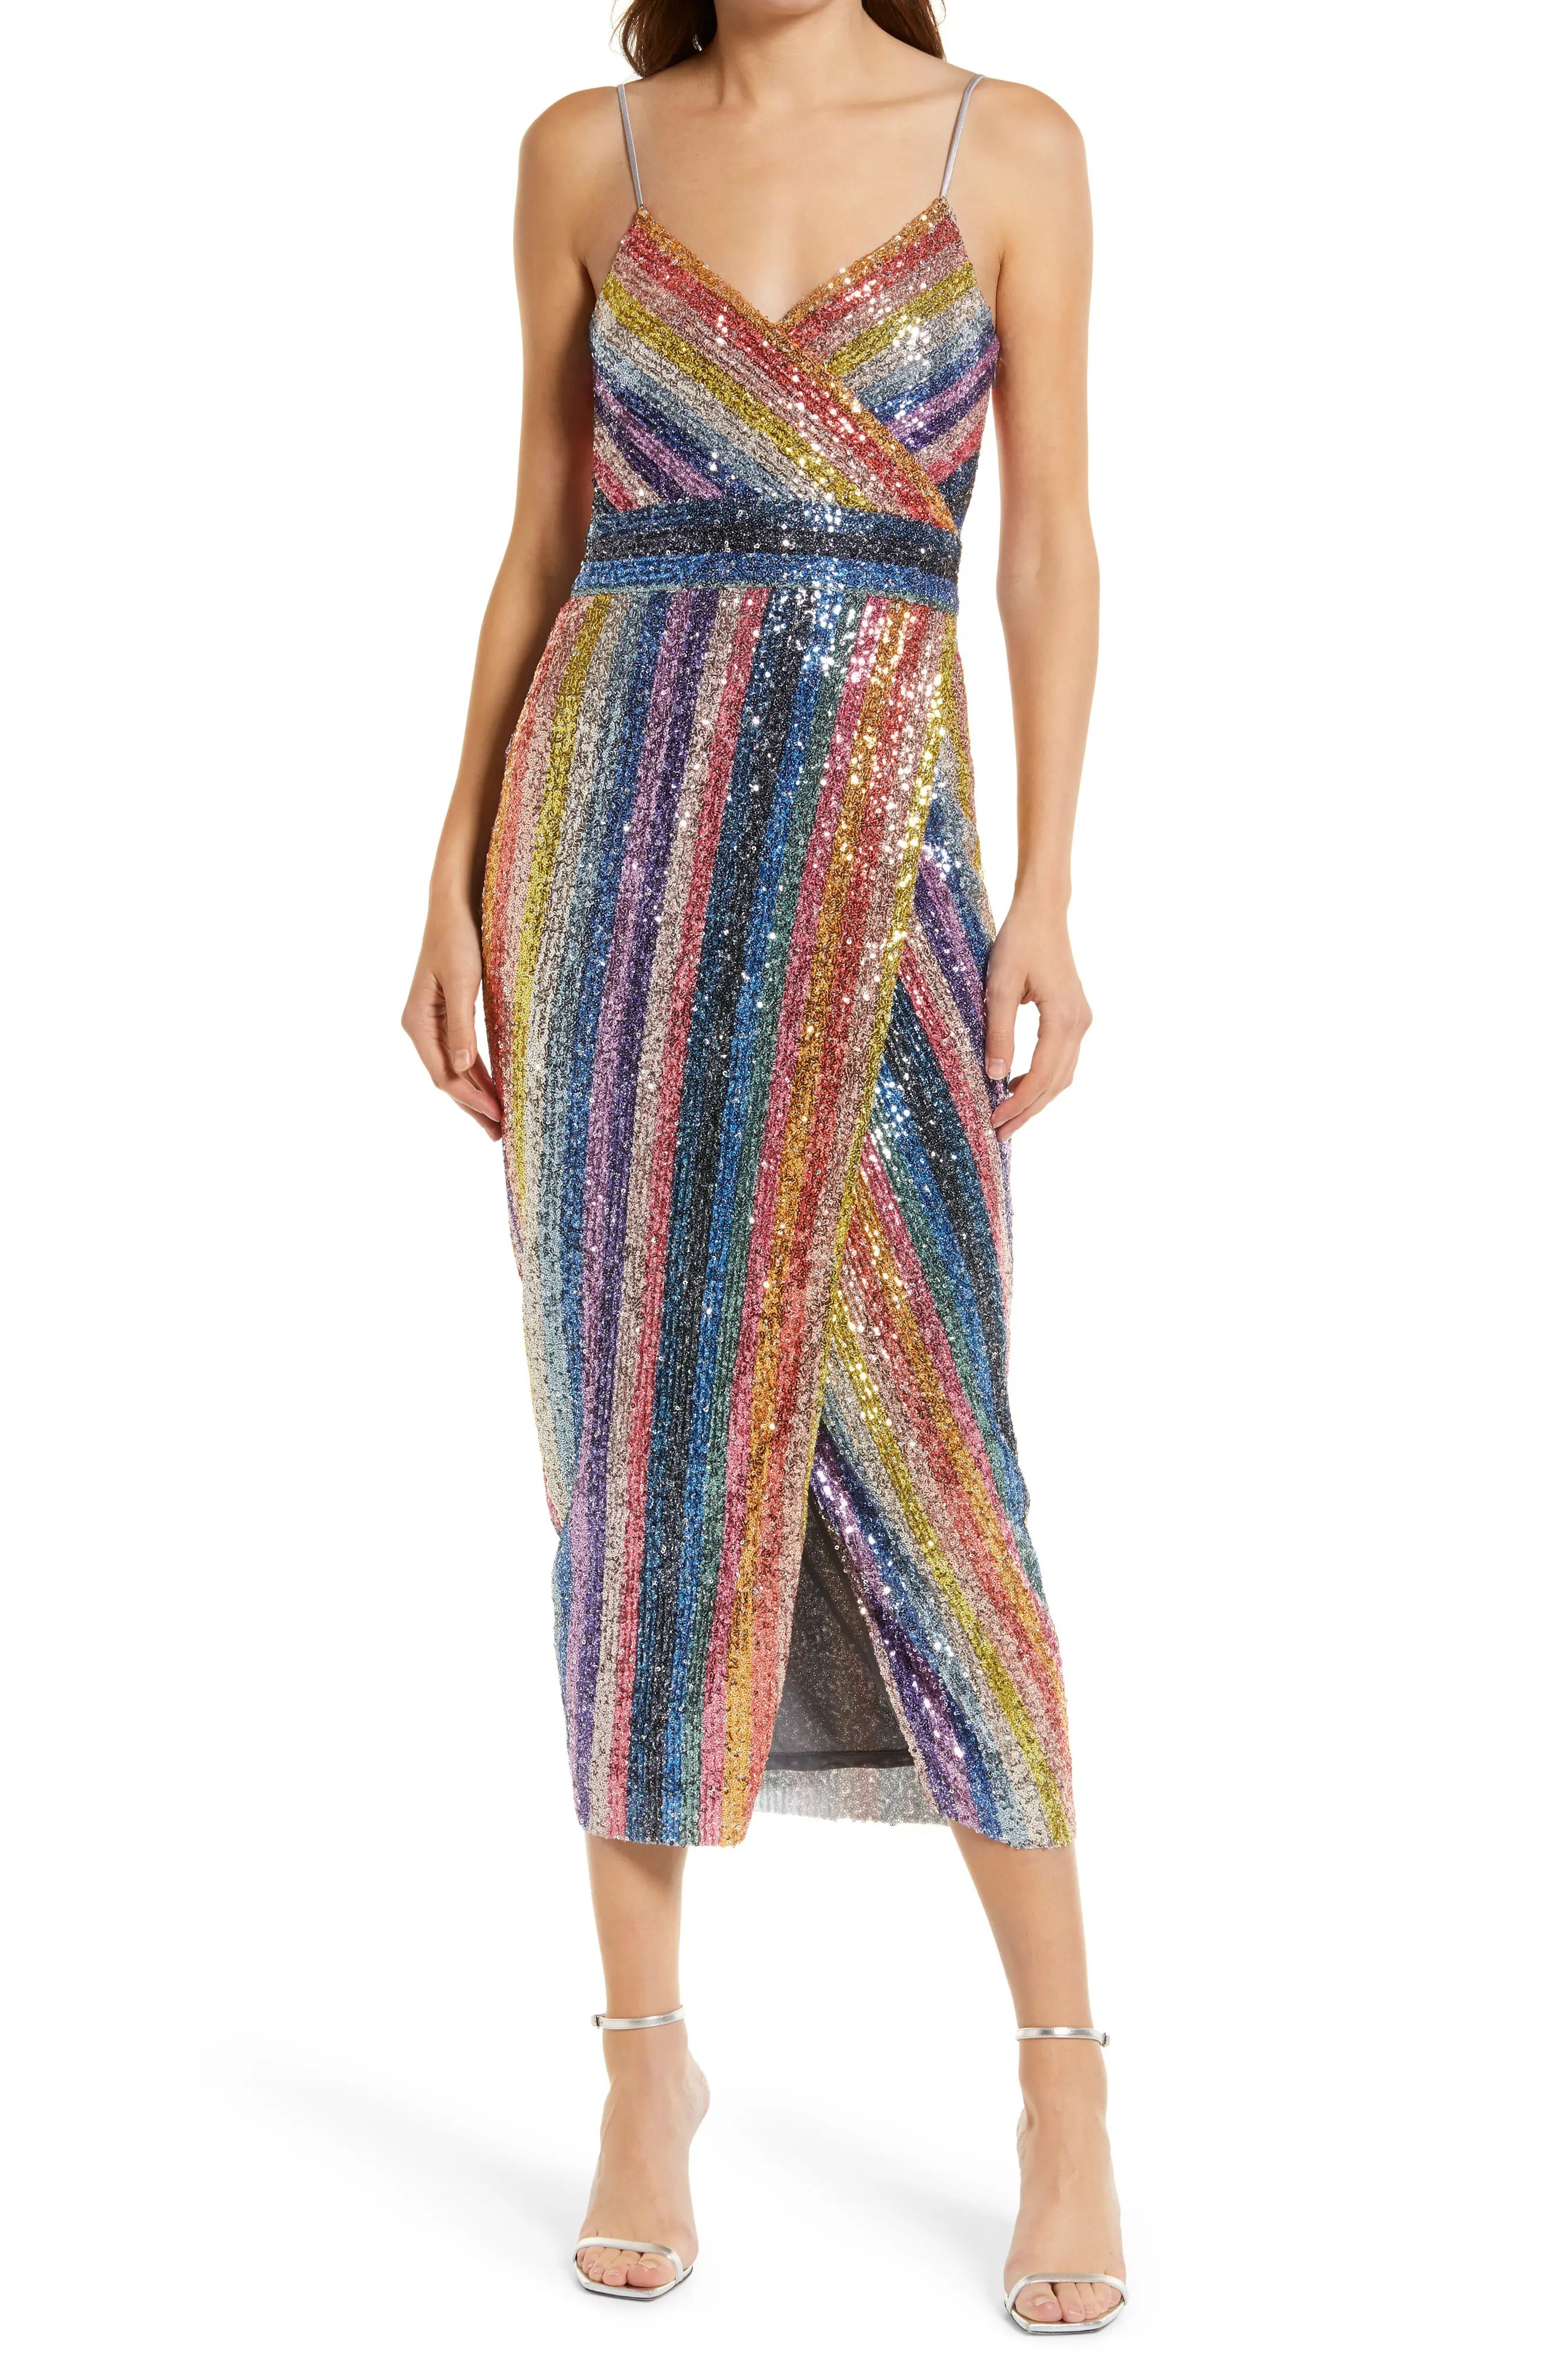 Saylor Meghan Faux Wrap Maxi Dress in Circus at Nordstrom, Size Large | Nordstrom